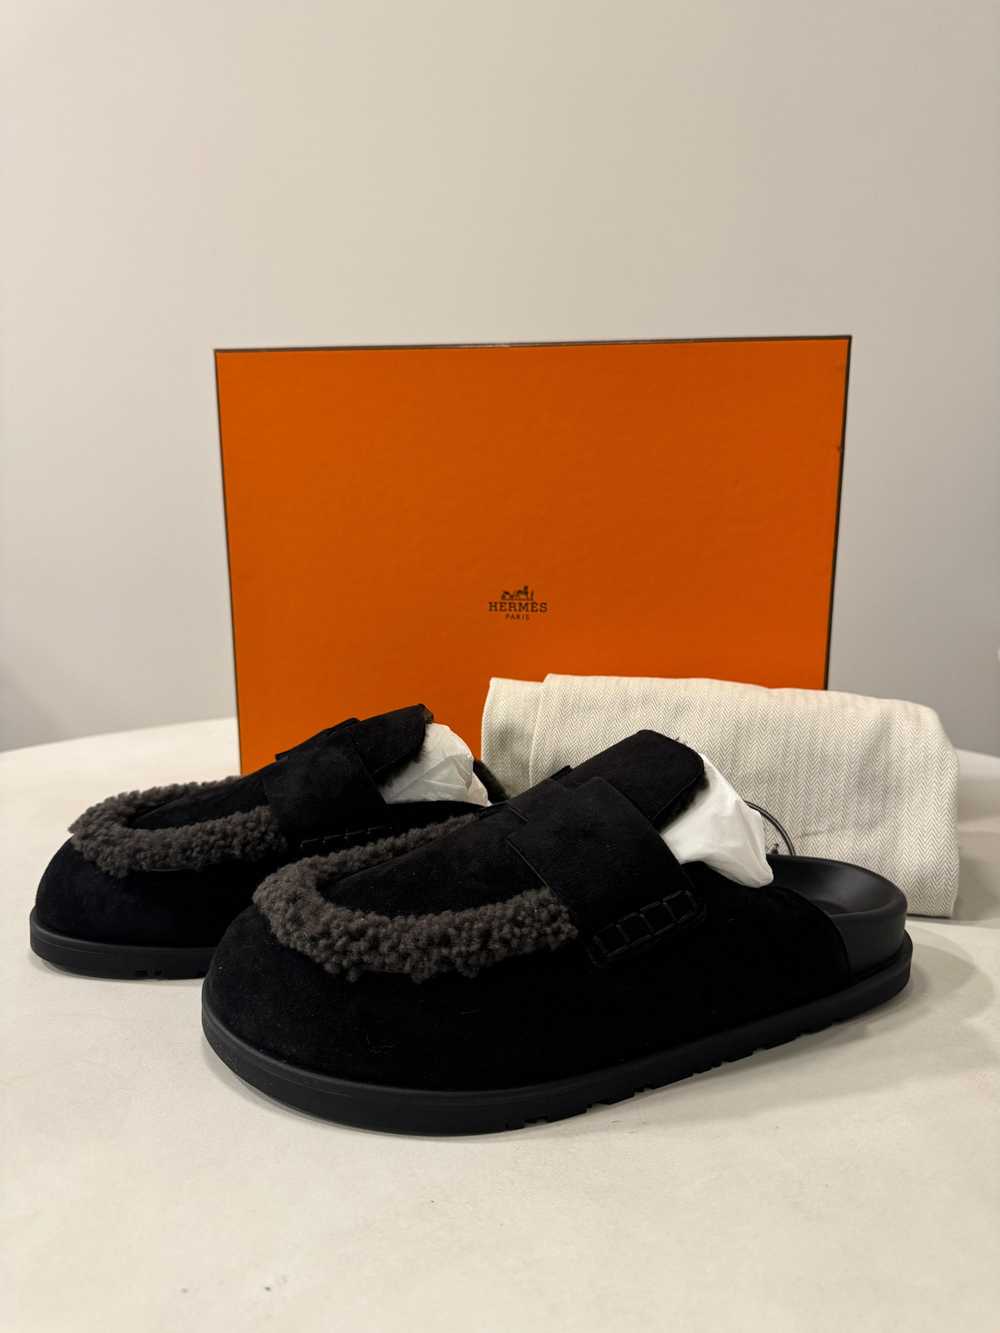 Hermes Hermes Black Suede and Shearling Go Mules - image 7